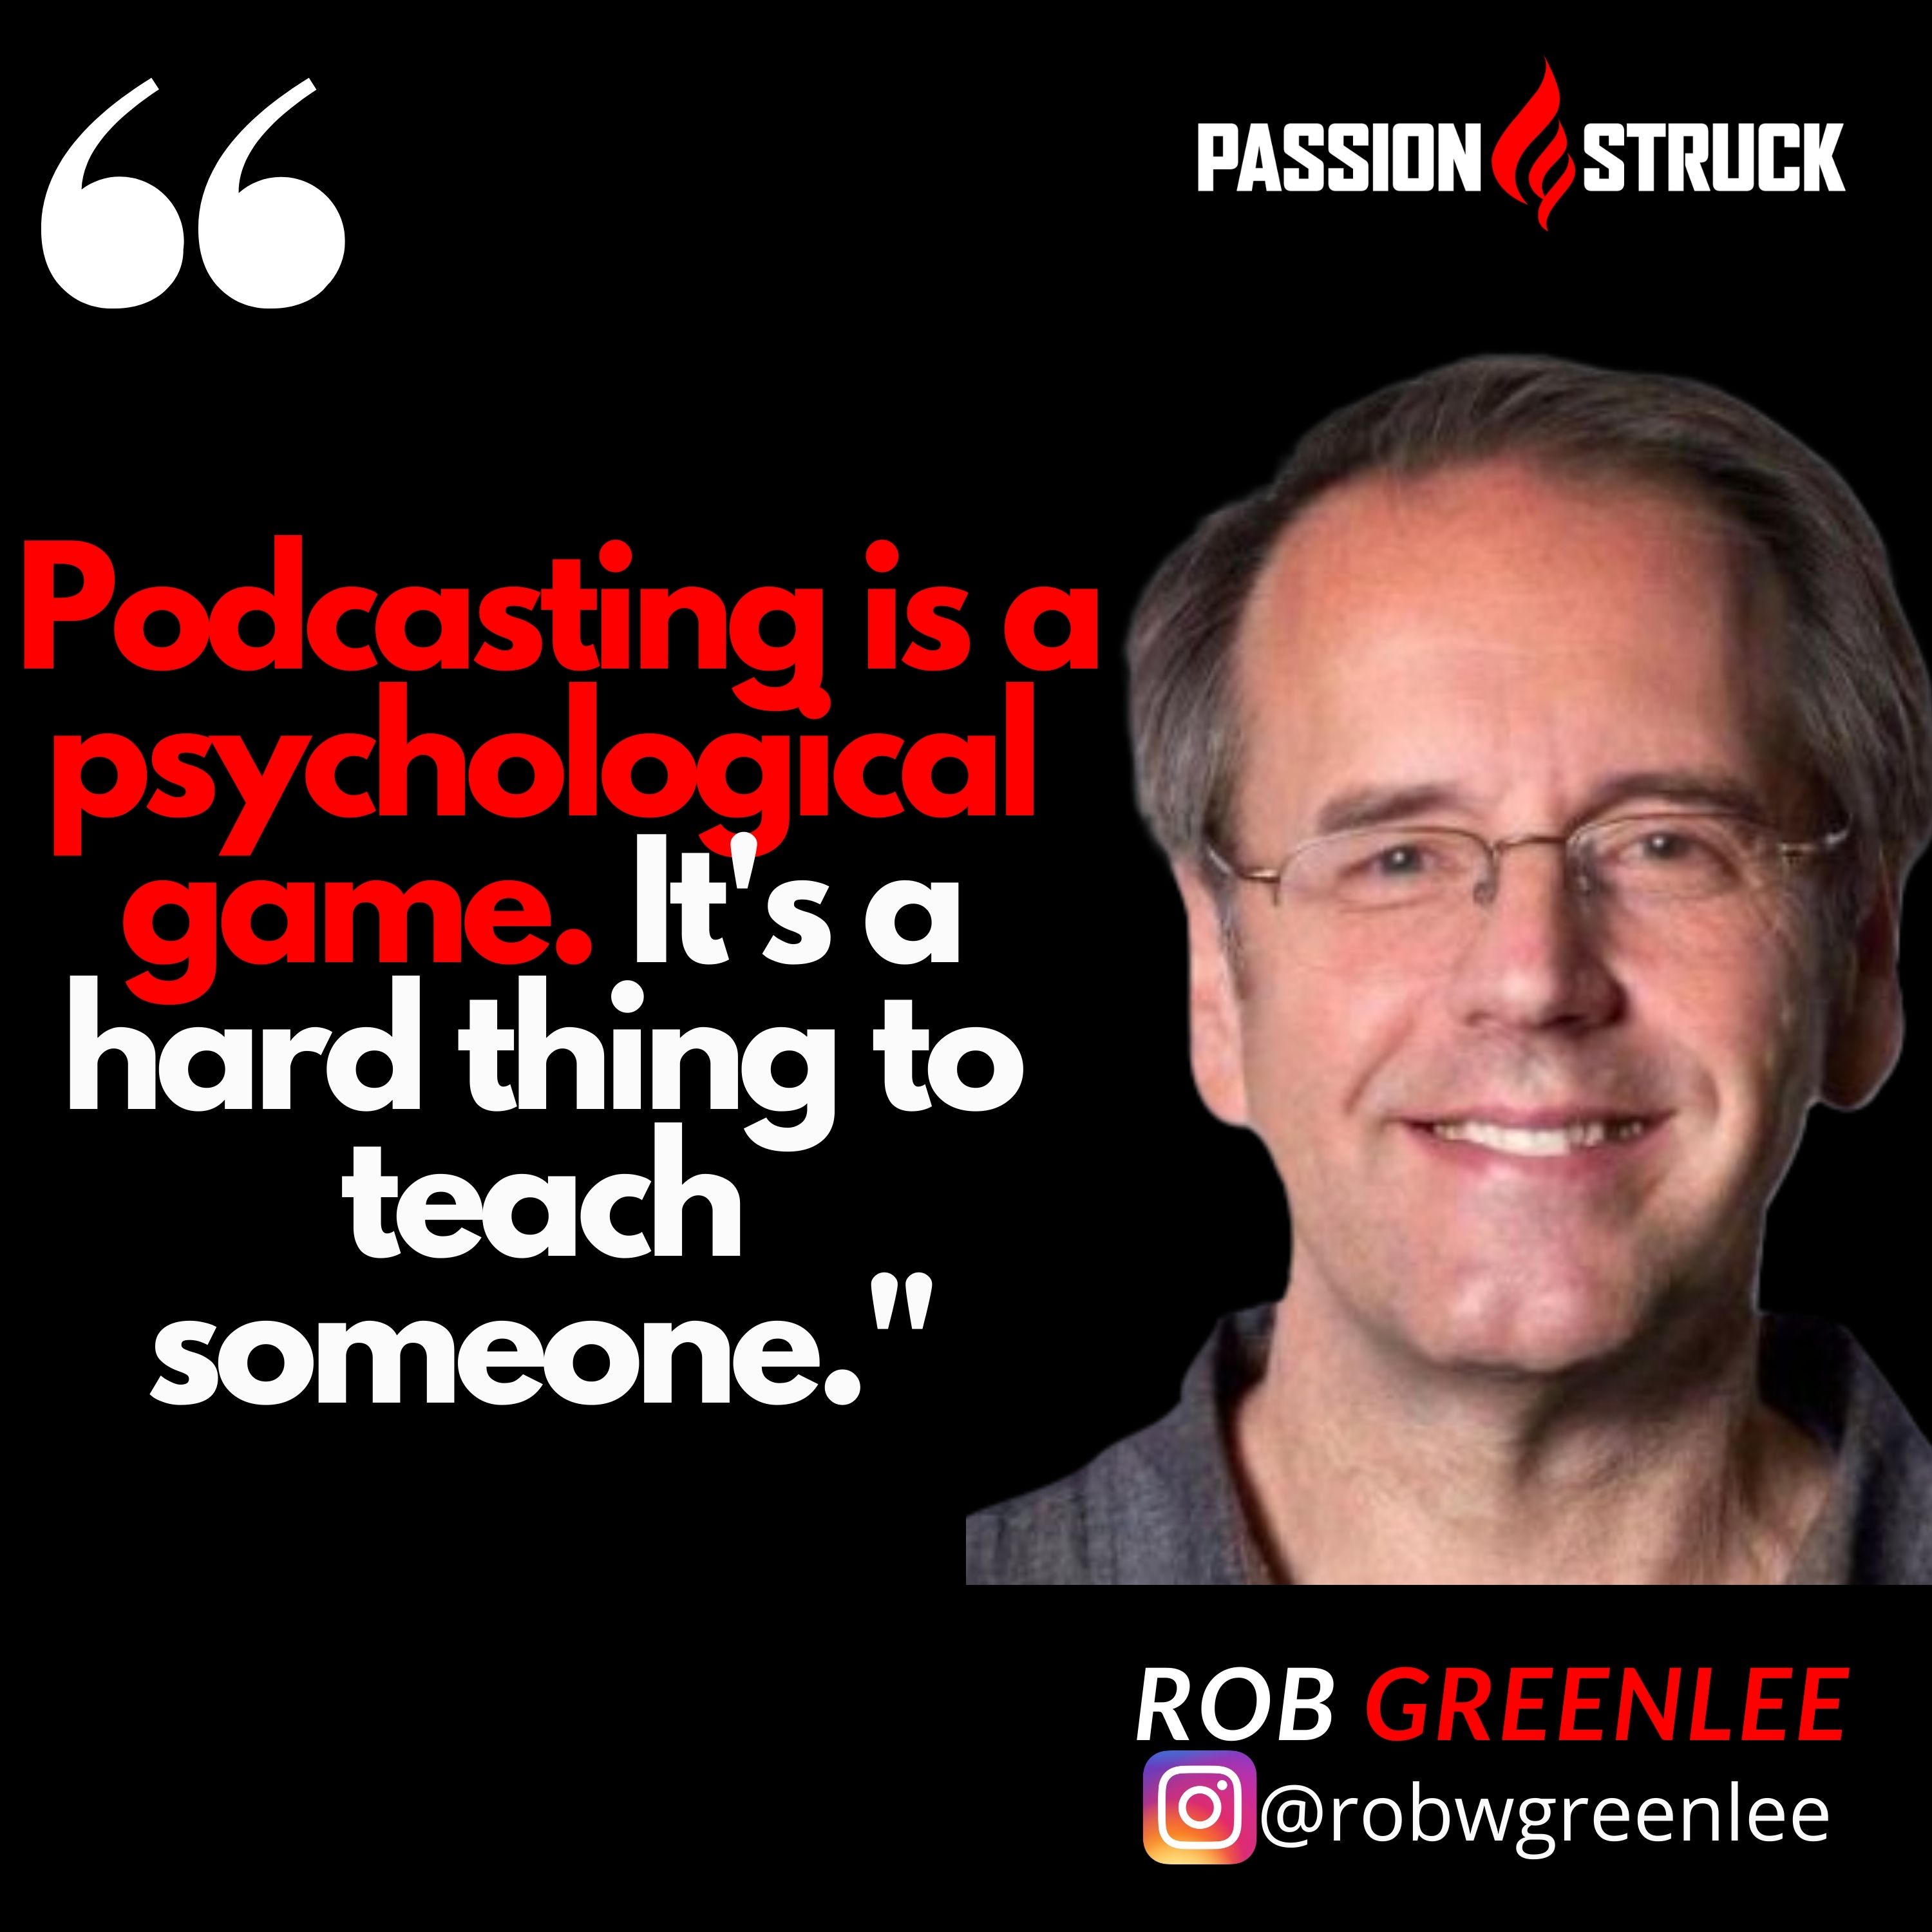 Quote by Rob Greenlee o podcasting being a psychological game on the passion struck podcast